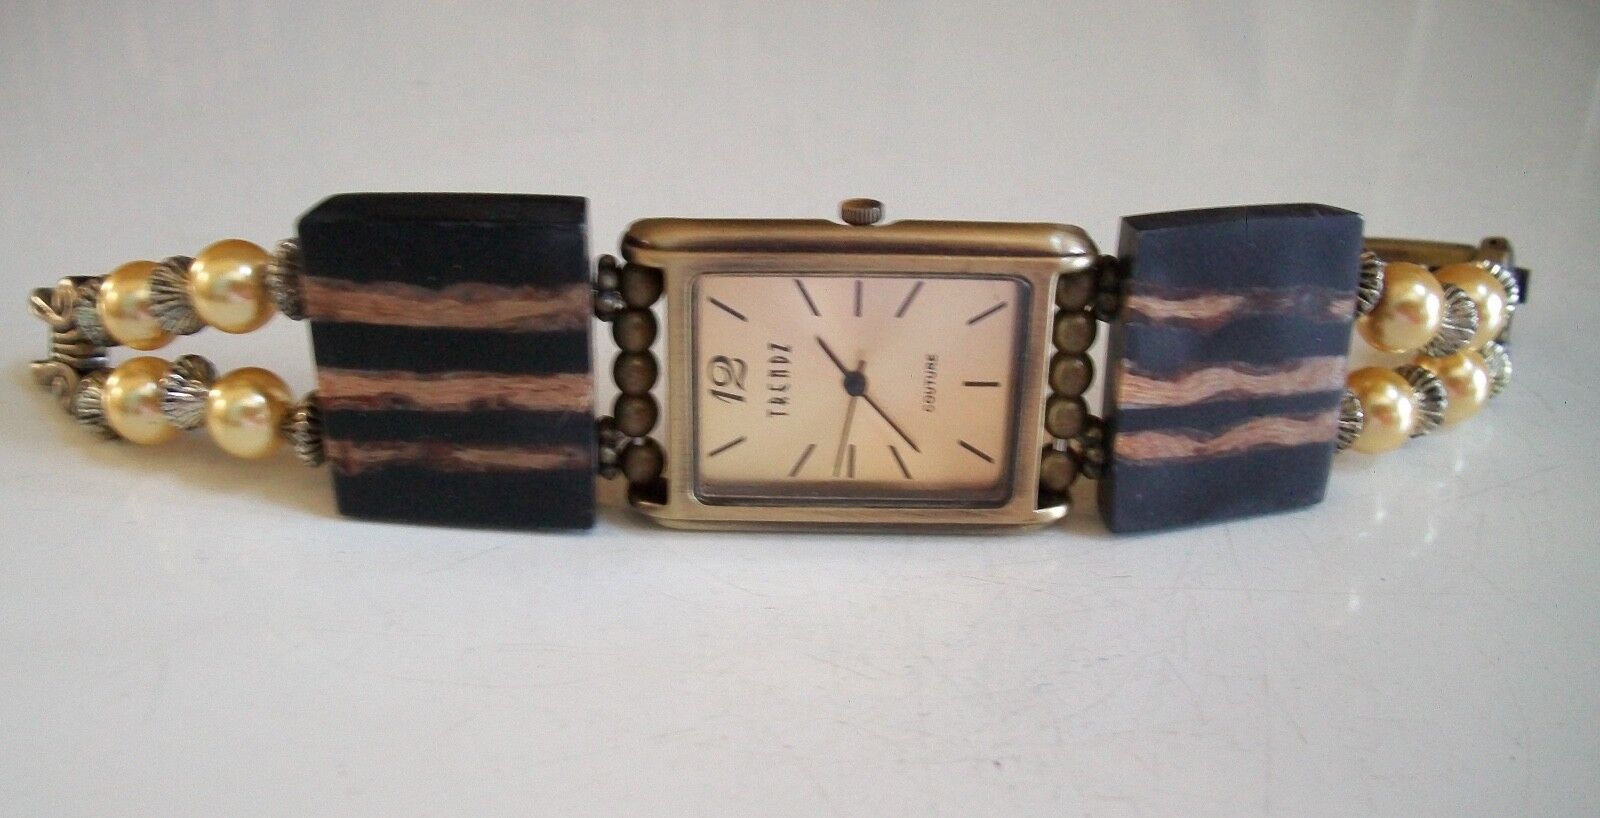 Wood look with pearls dressy/casual women fashion  watch